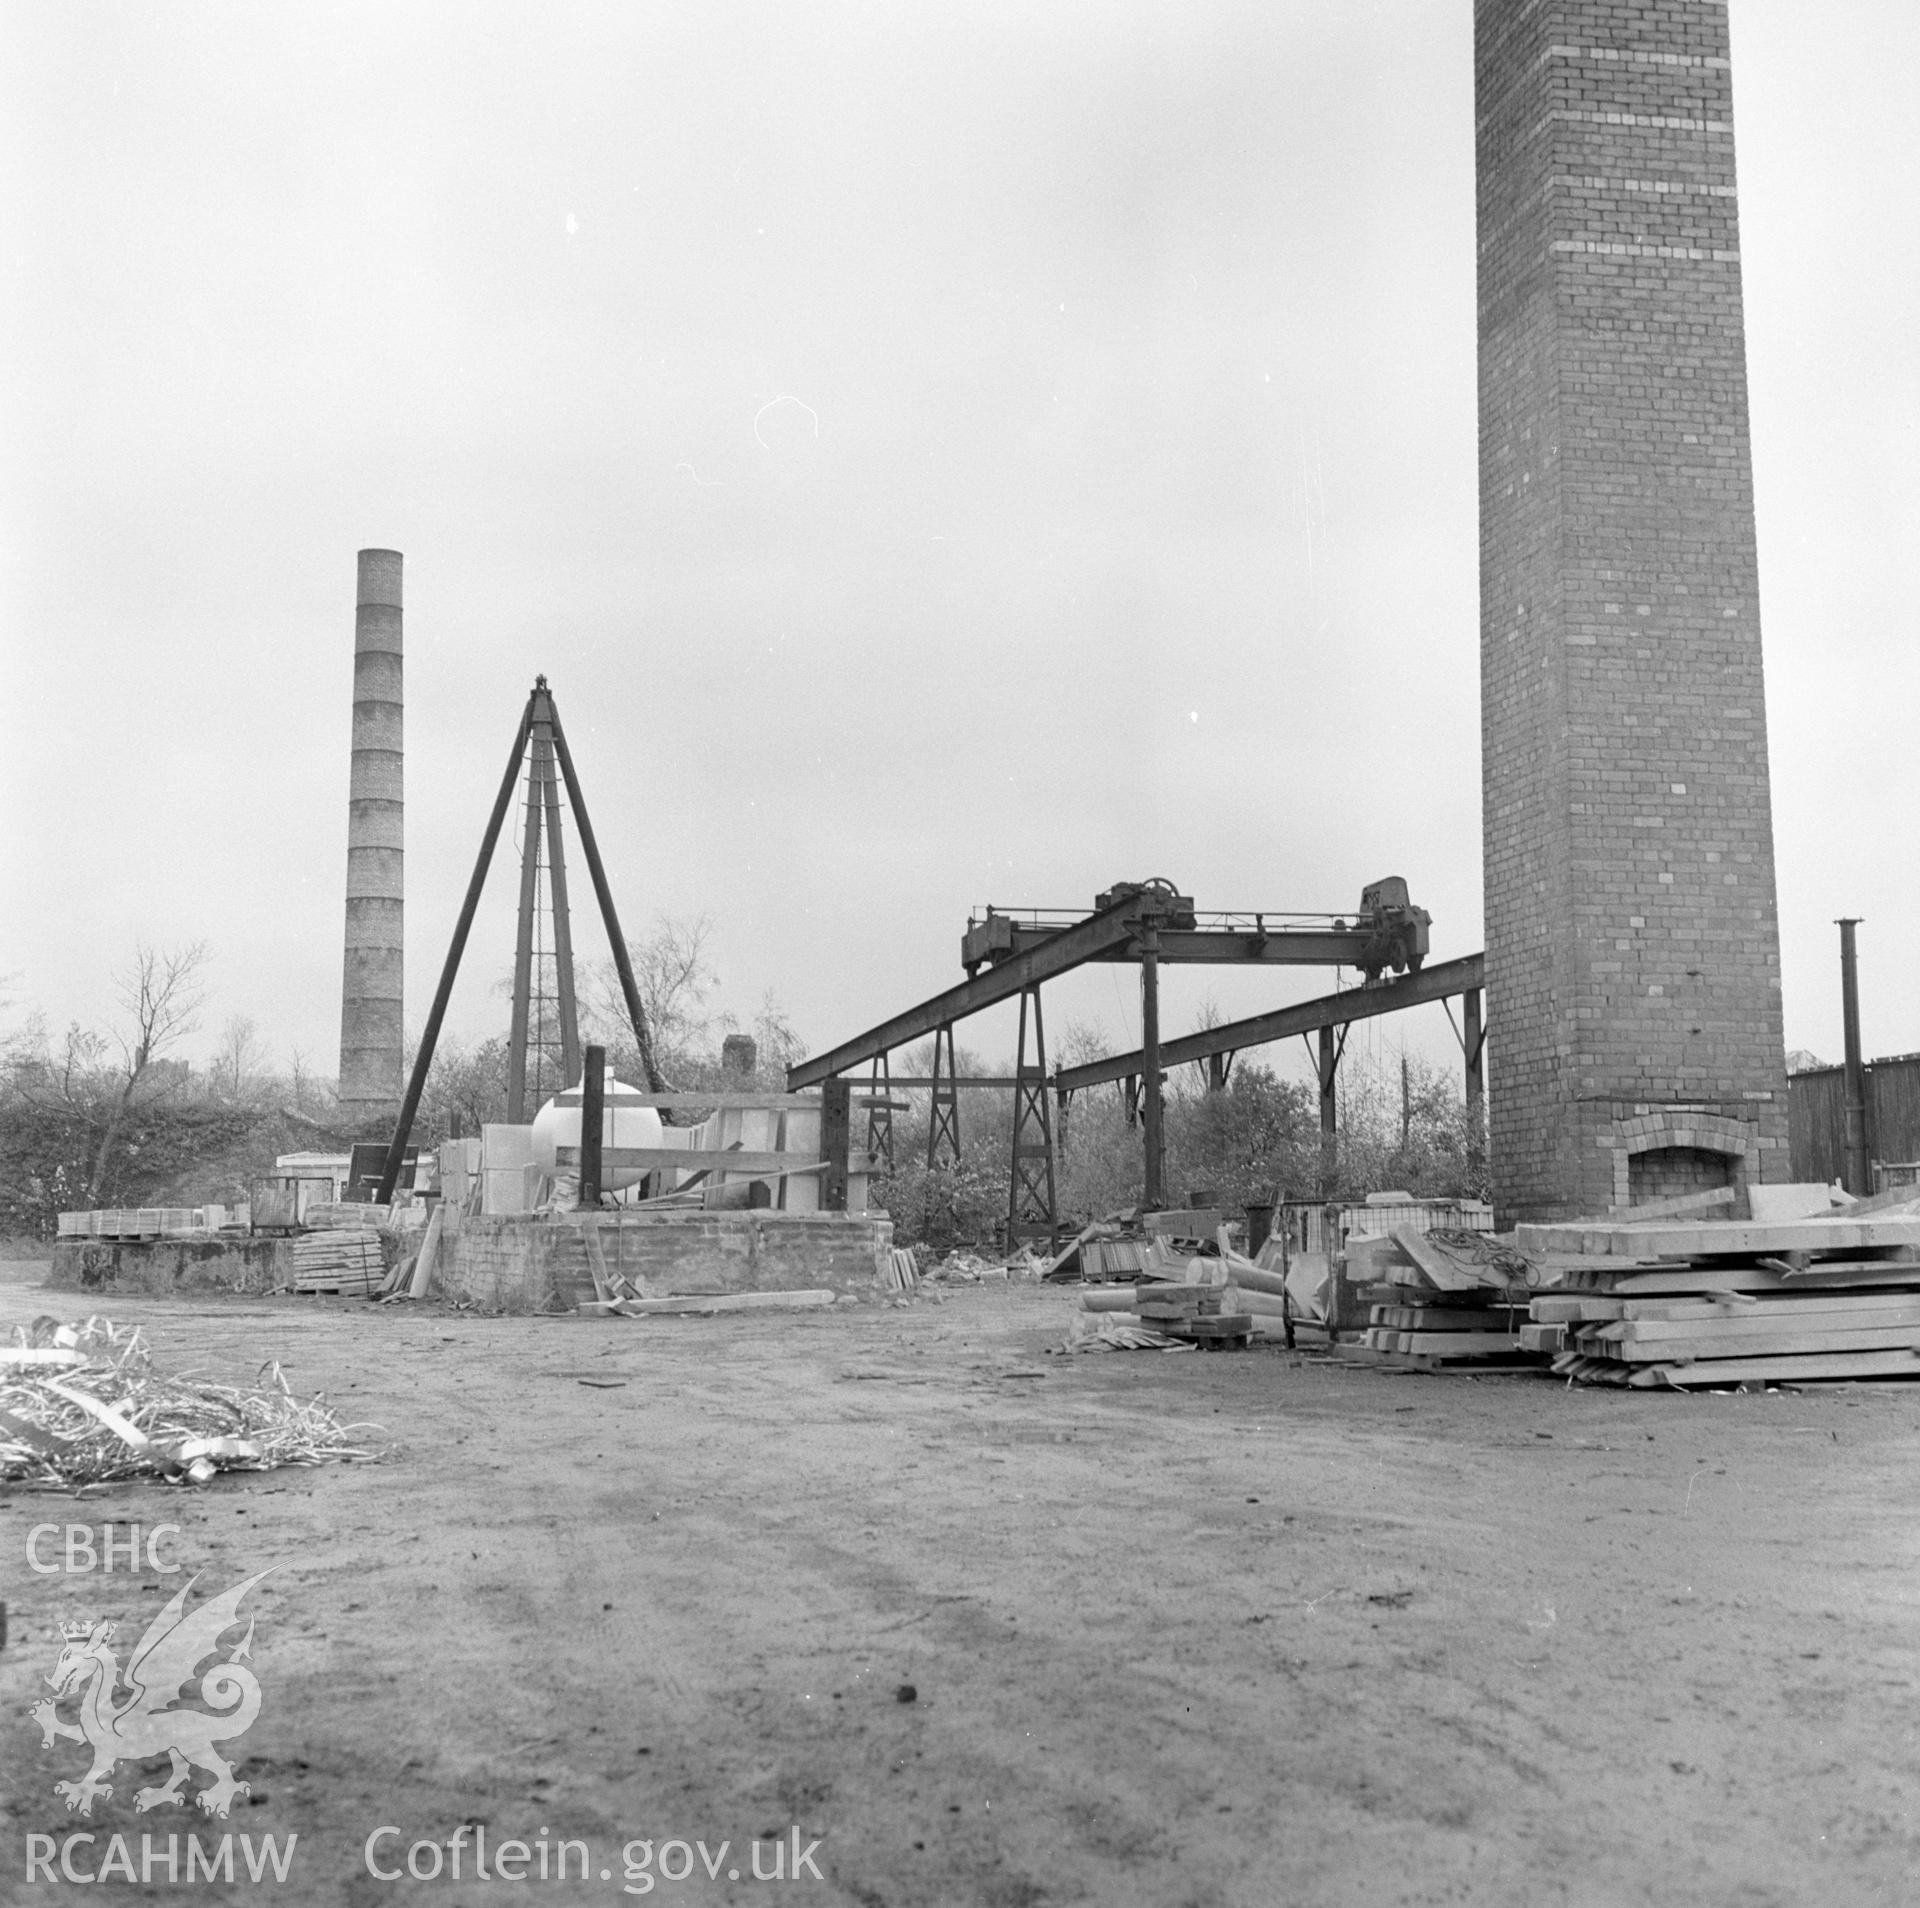 Digital copy of a black and white negative showing exterior view of the building housing the crane at Player's Works Foundry, Clydach, taken by RCAHMW, undated.